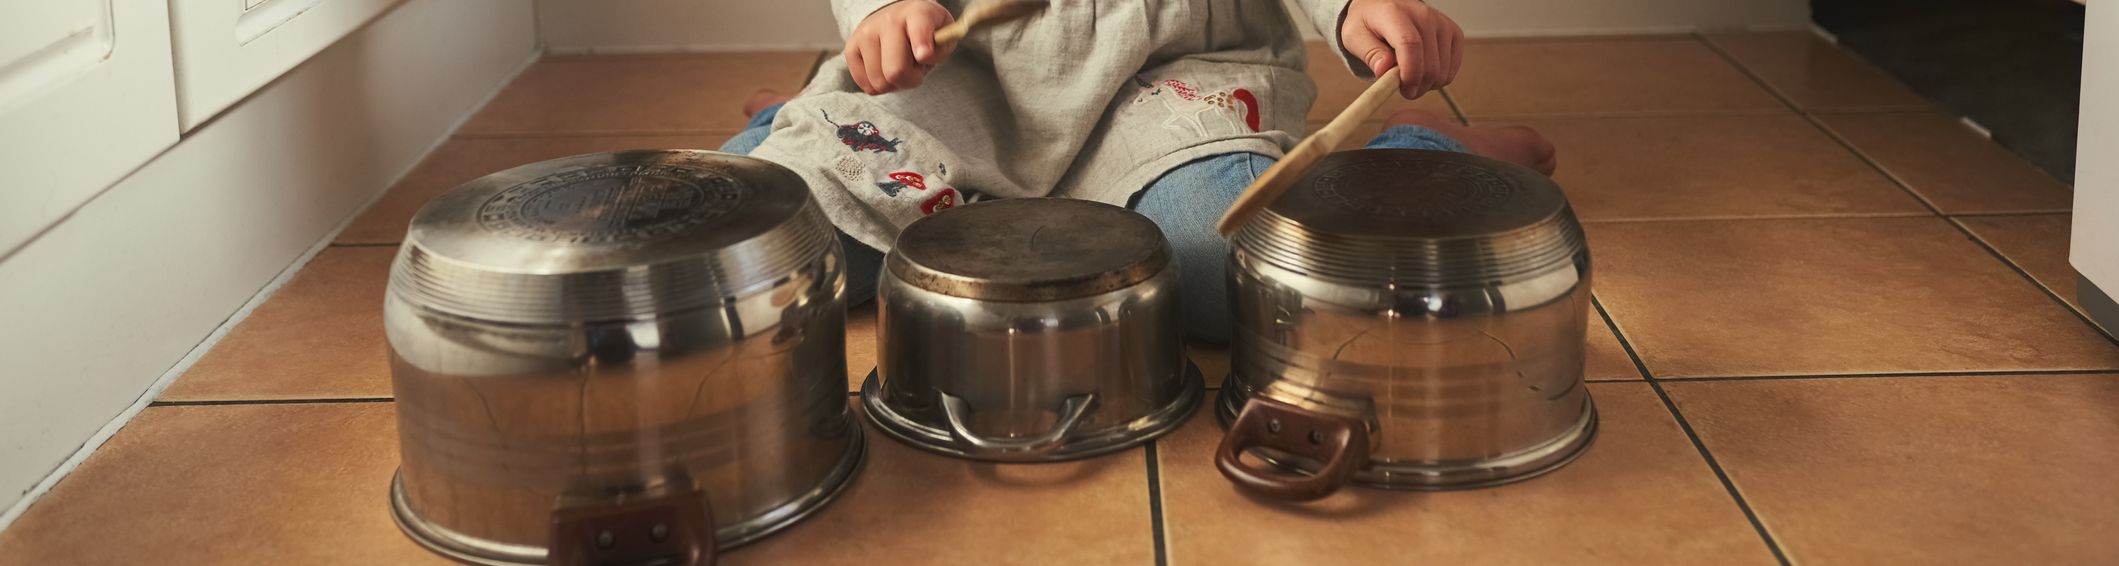 Shot of a little girl playing drums on a set of pots in the kitchen